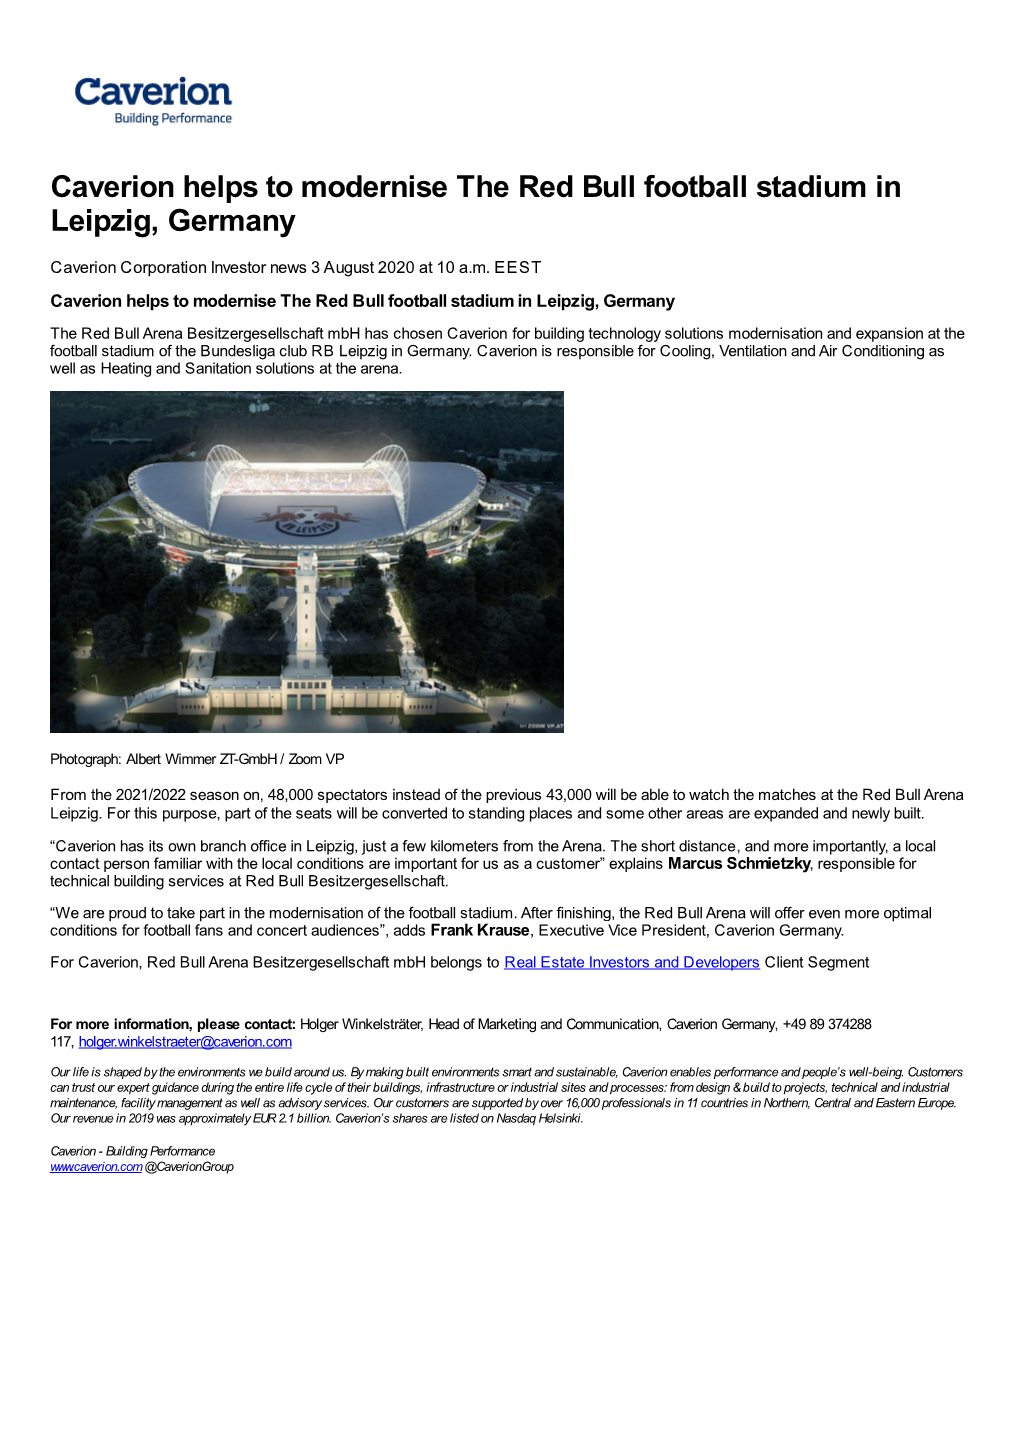 Caverion Helps to Modernise the Red Bull Football Stadium in Leipzig, Germany